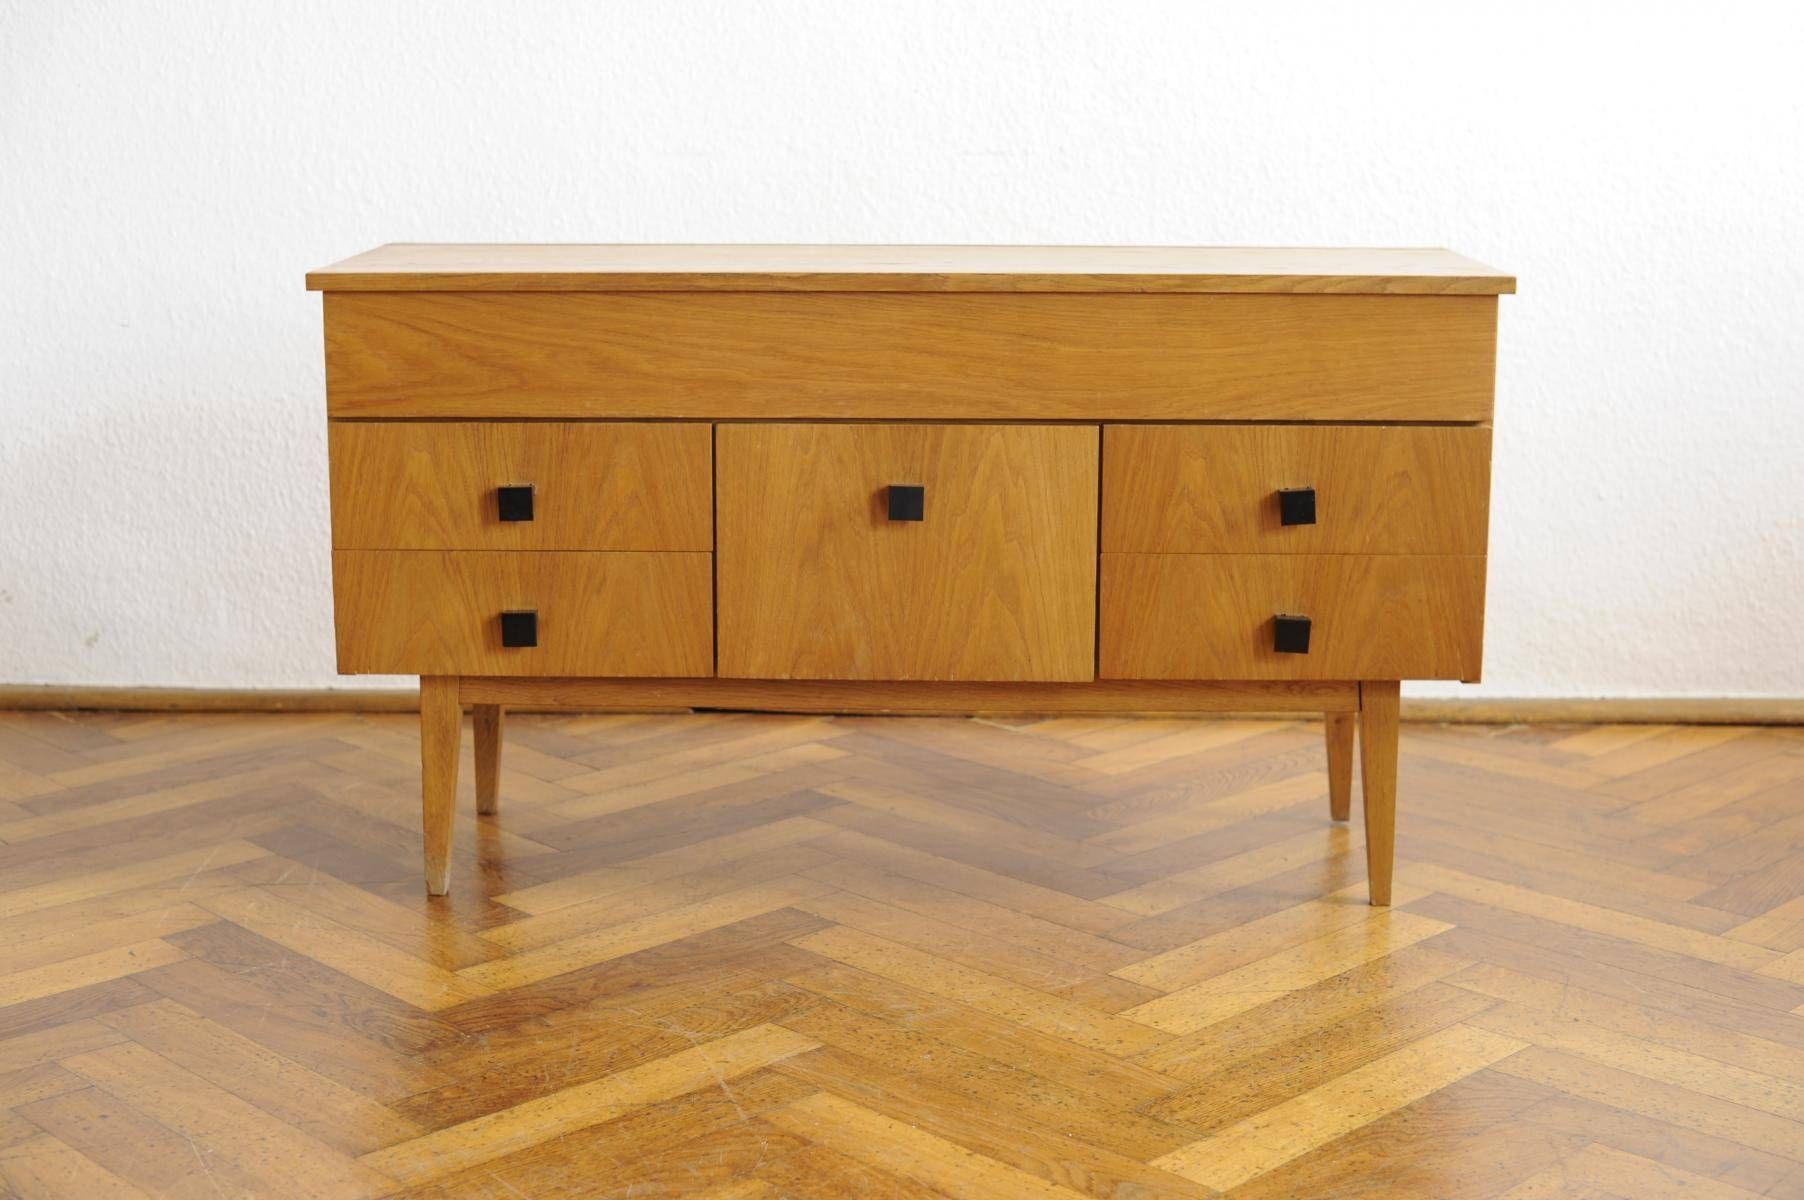 Vintage Modernist Sideboard With Beech Veneer For Sale At Pamono For Beech Sideboards (View 10 of 20)